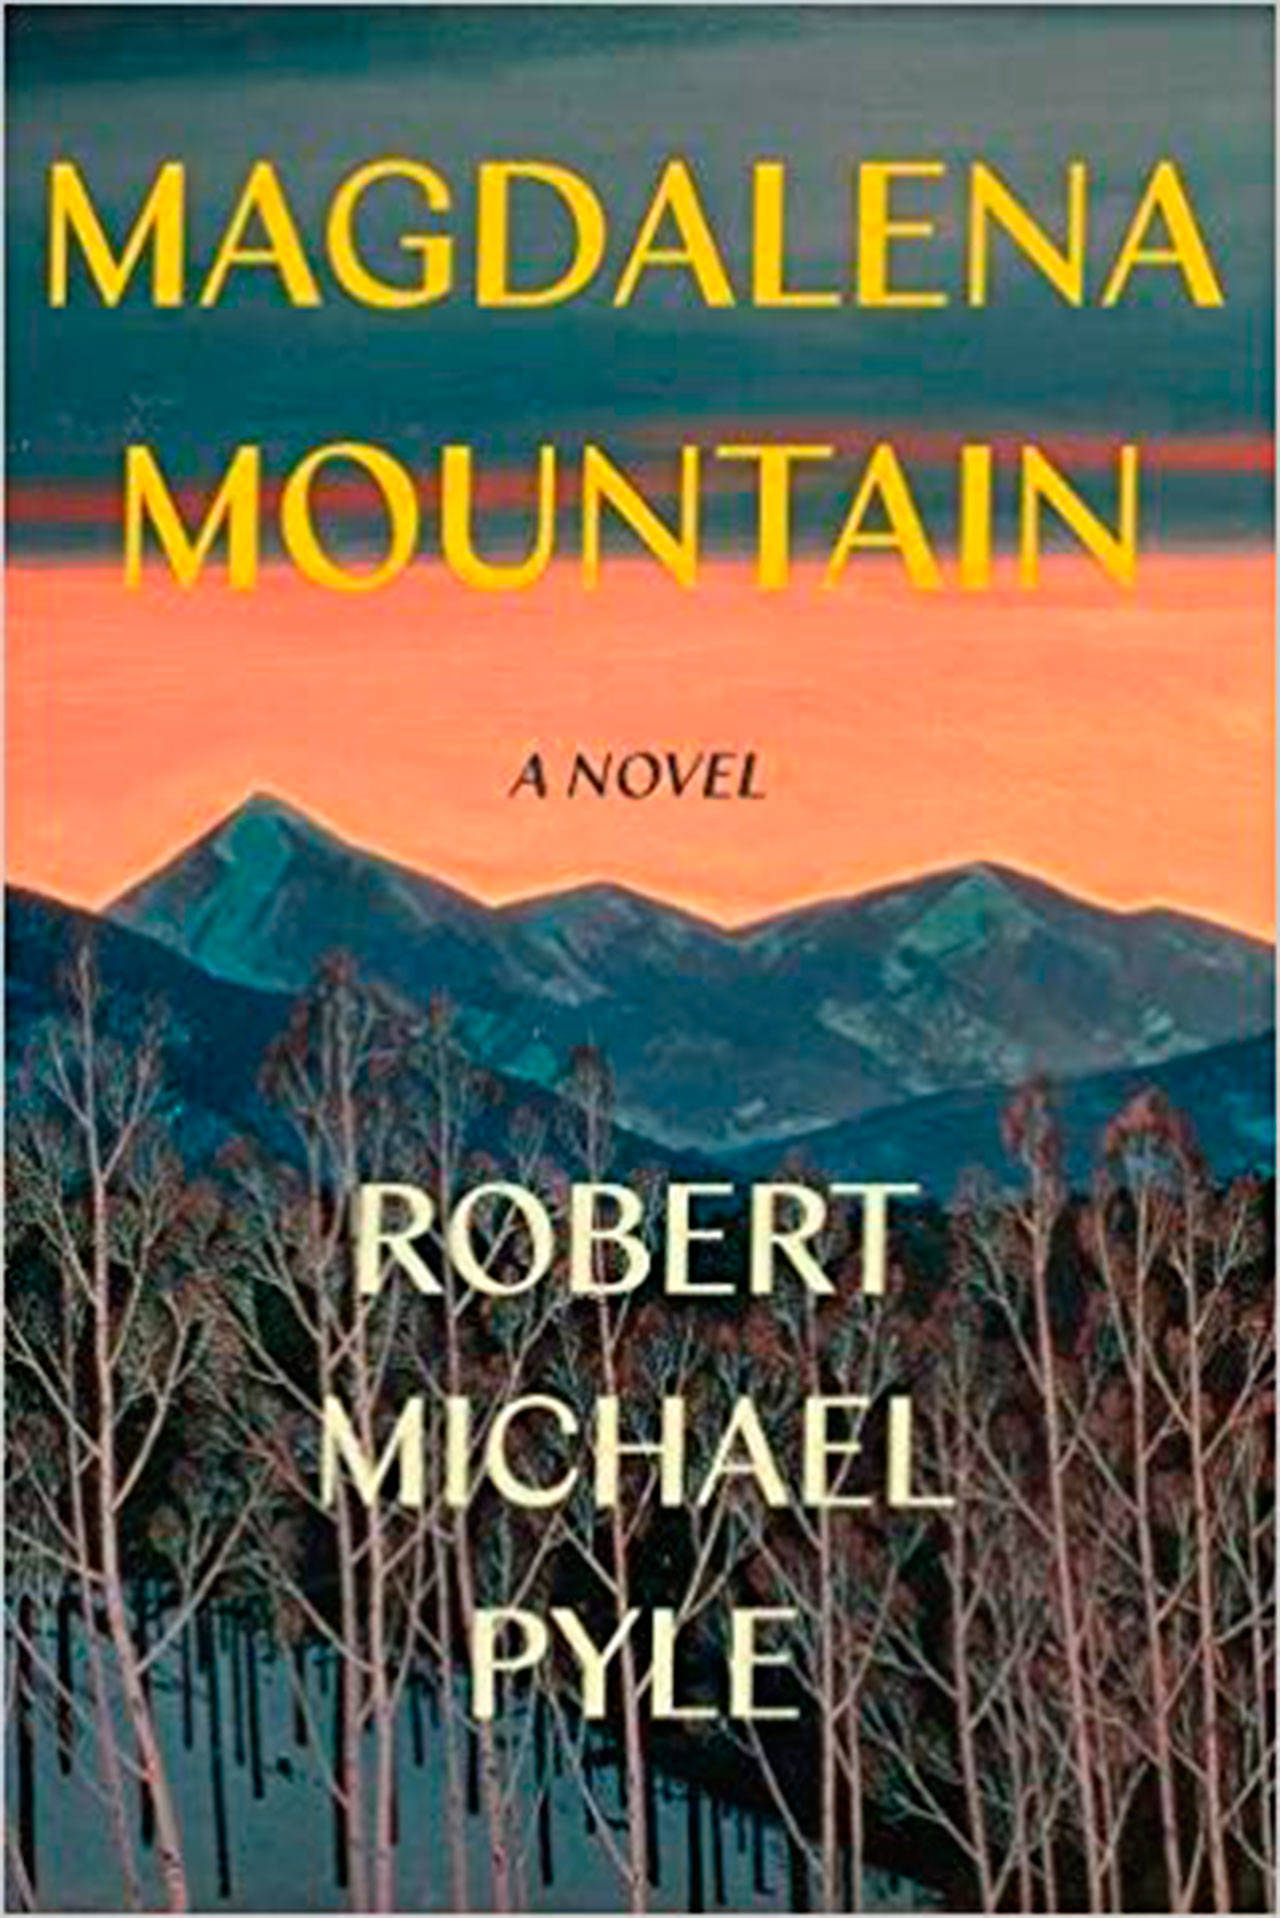 Image courtesy of Eagle Harbor Book Company | Noted ecologist Robert Michael Pyle will return to Eagle Harbor Book Company at 4 p.m. Sunday, Feb. 17 to read from and discuss his latest release, his first and long-awaited novel “Magdalena Mountain.”